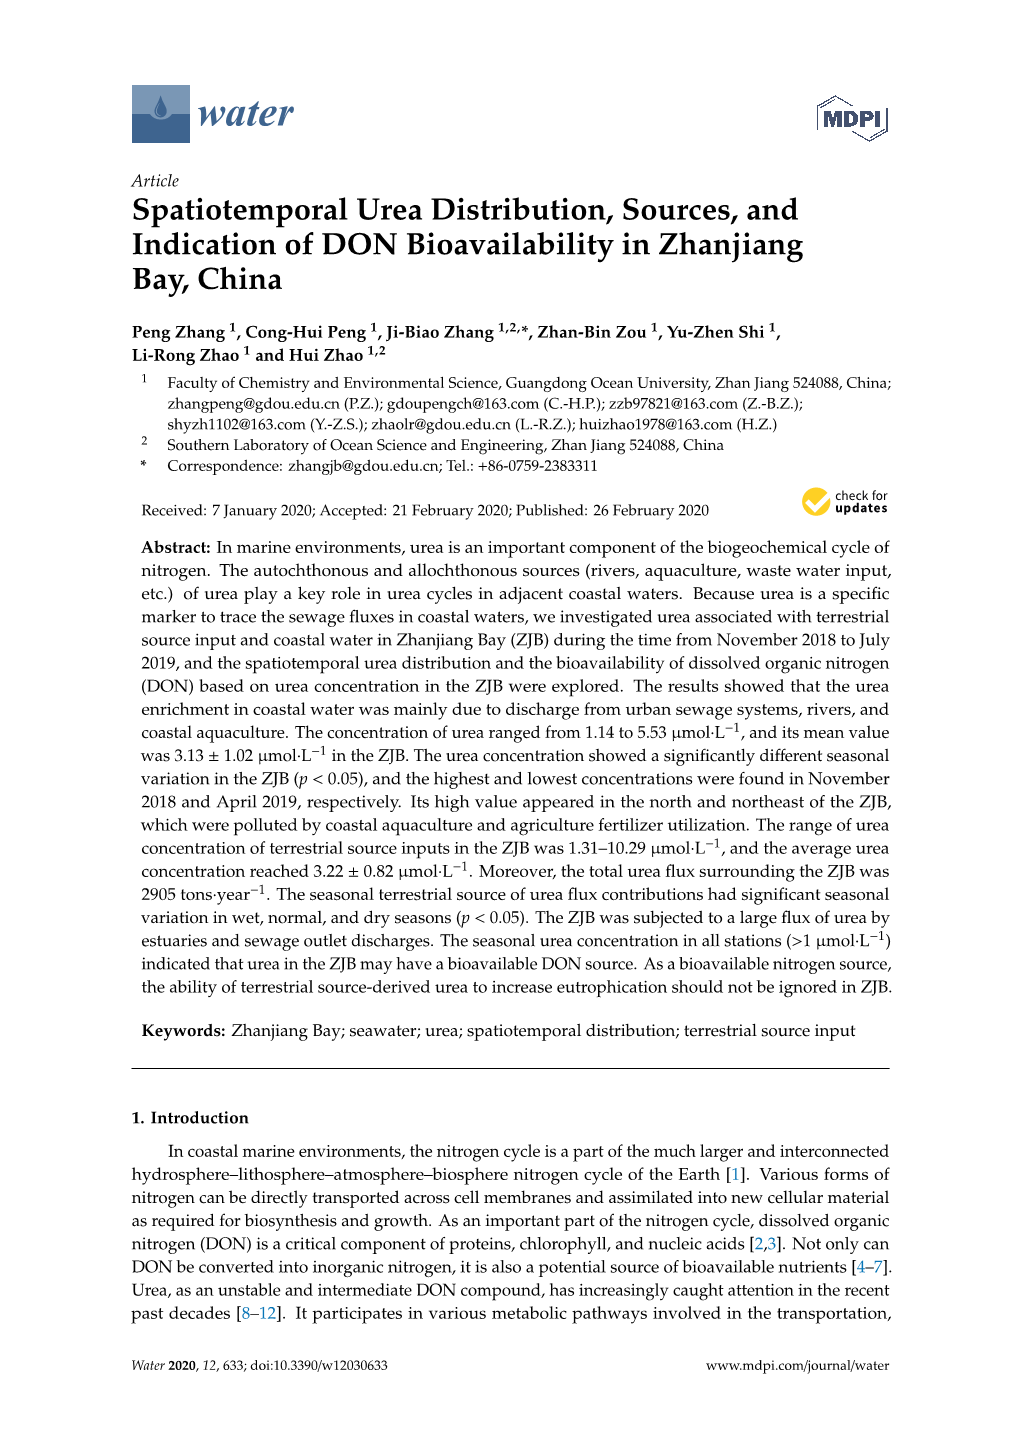 Spatiotemporal Urea Distribution, Sources, and Indication of DON Bioavailability in Zhanjiang Bay, China